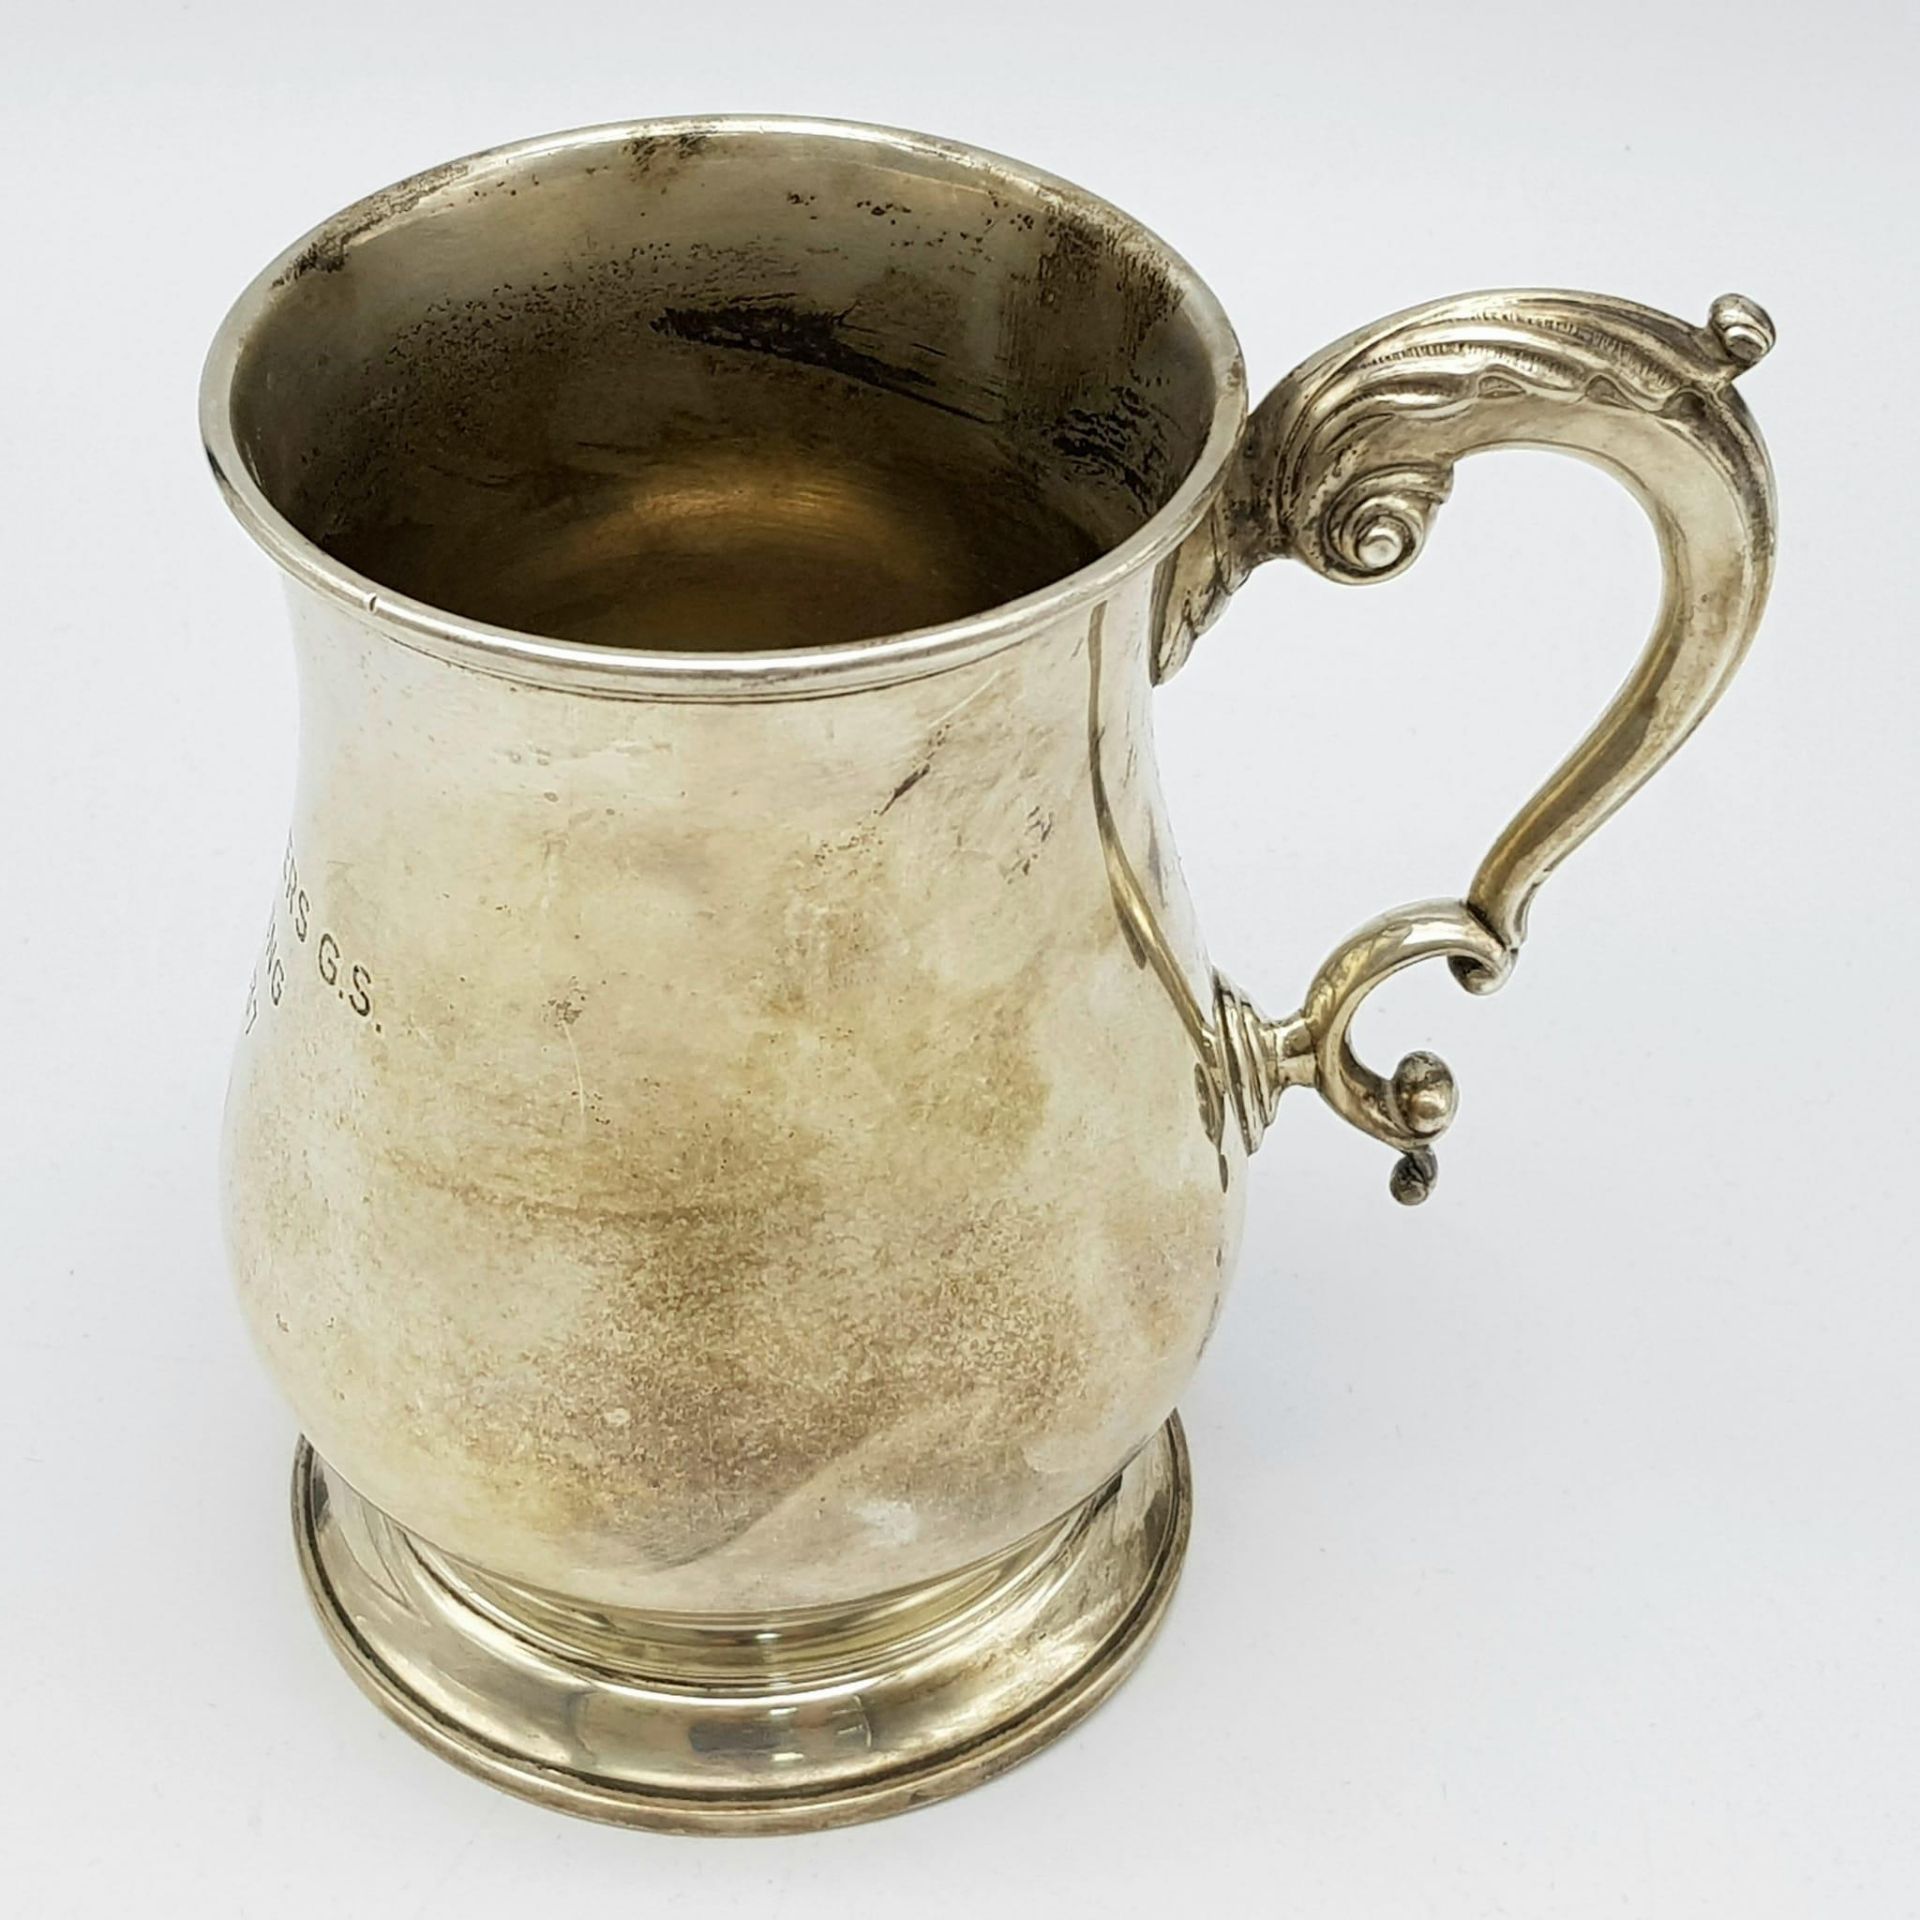 A Sterling Silver Tankard Given to the Thrusters! Hourglass design with an ornate handle. - Image 2 of 14